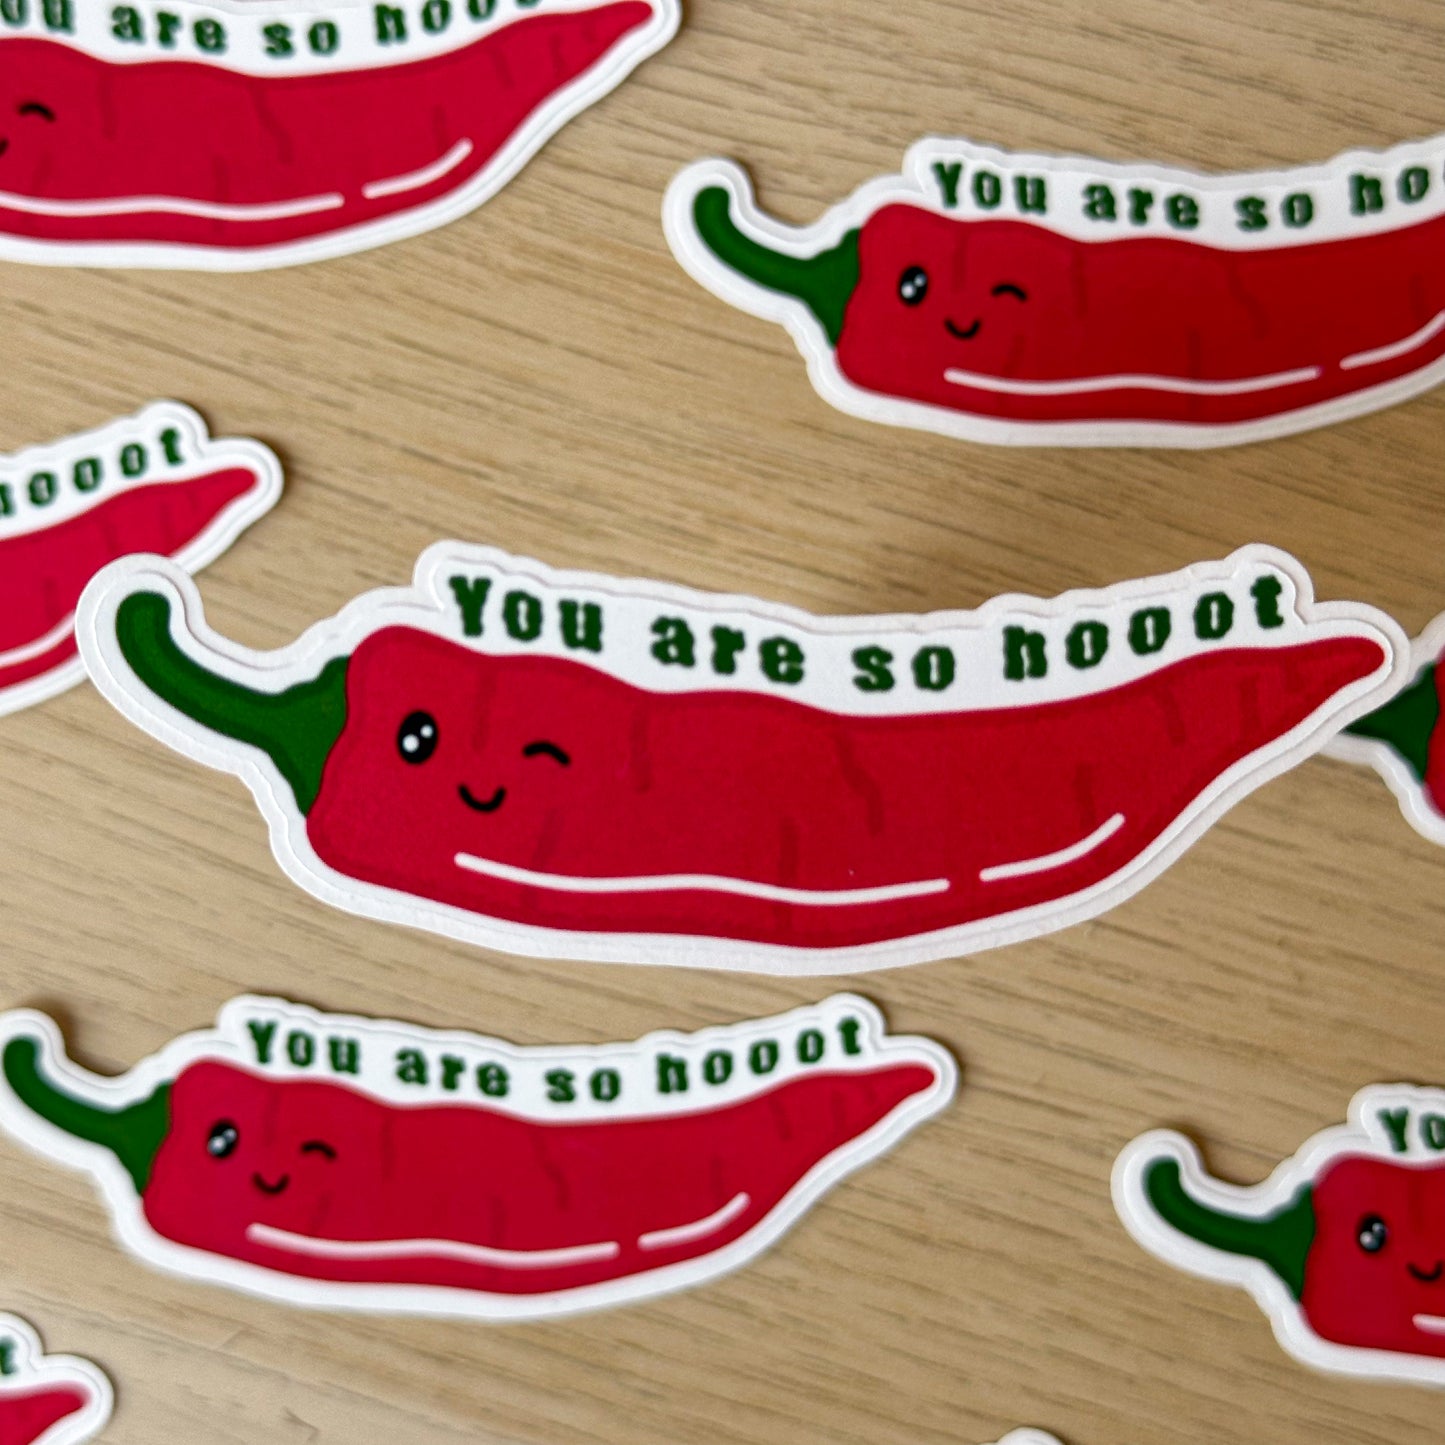 CHILLI YOU ARE SO HOOOT STICKER